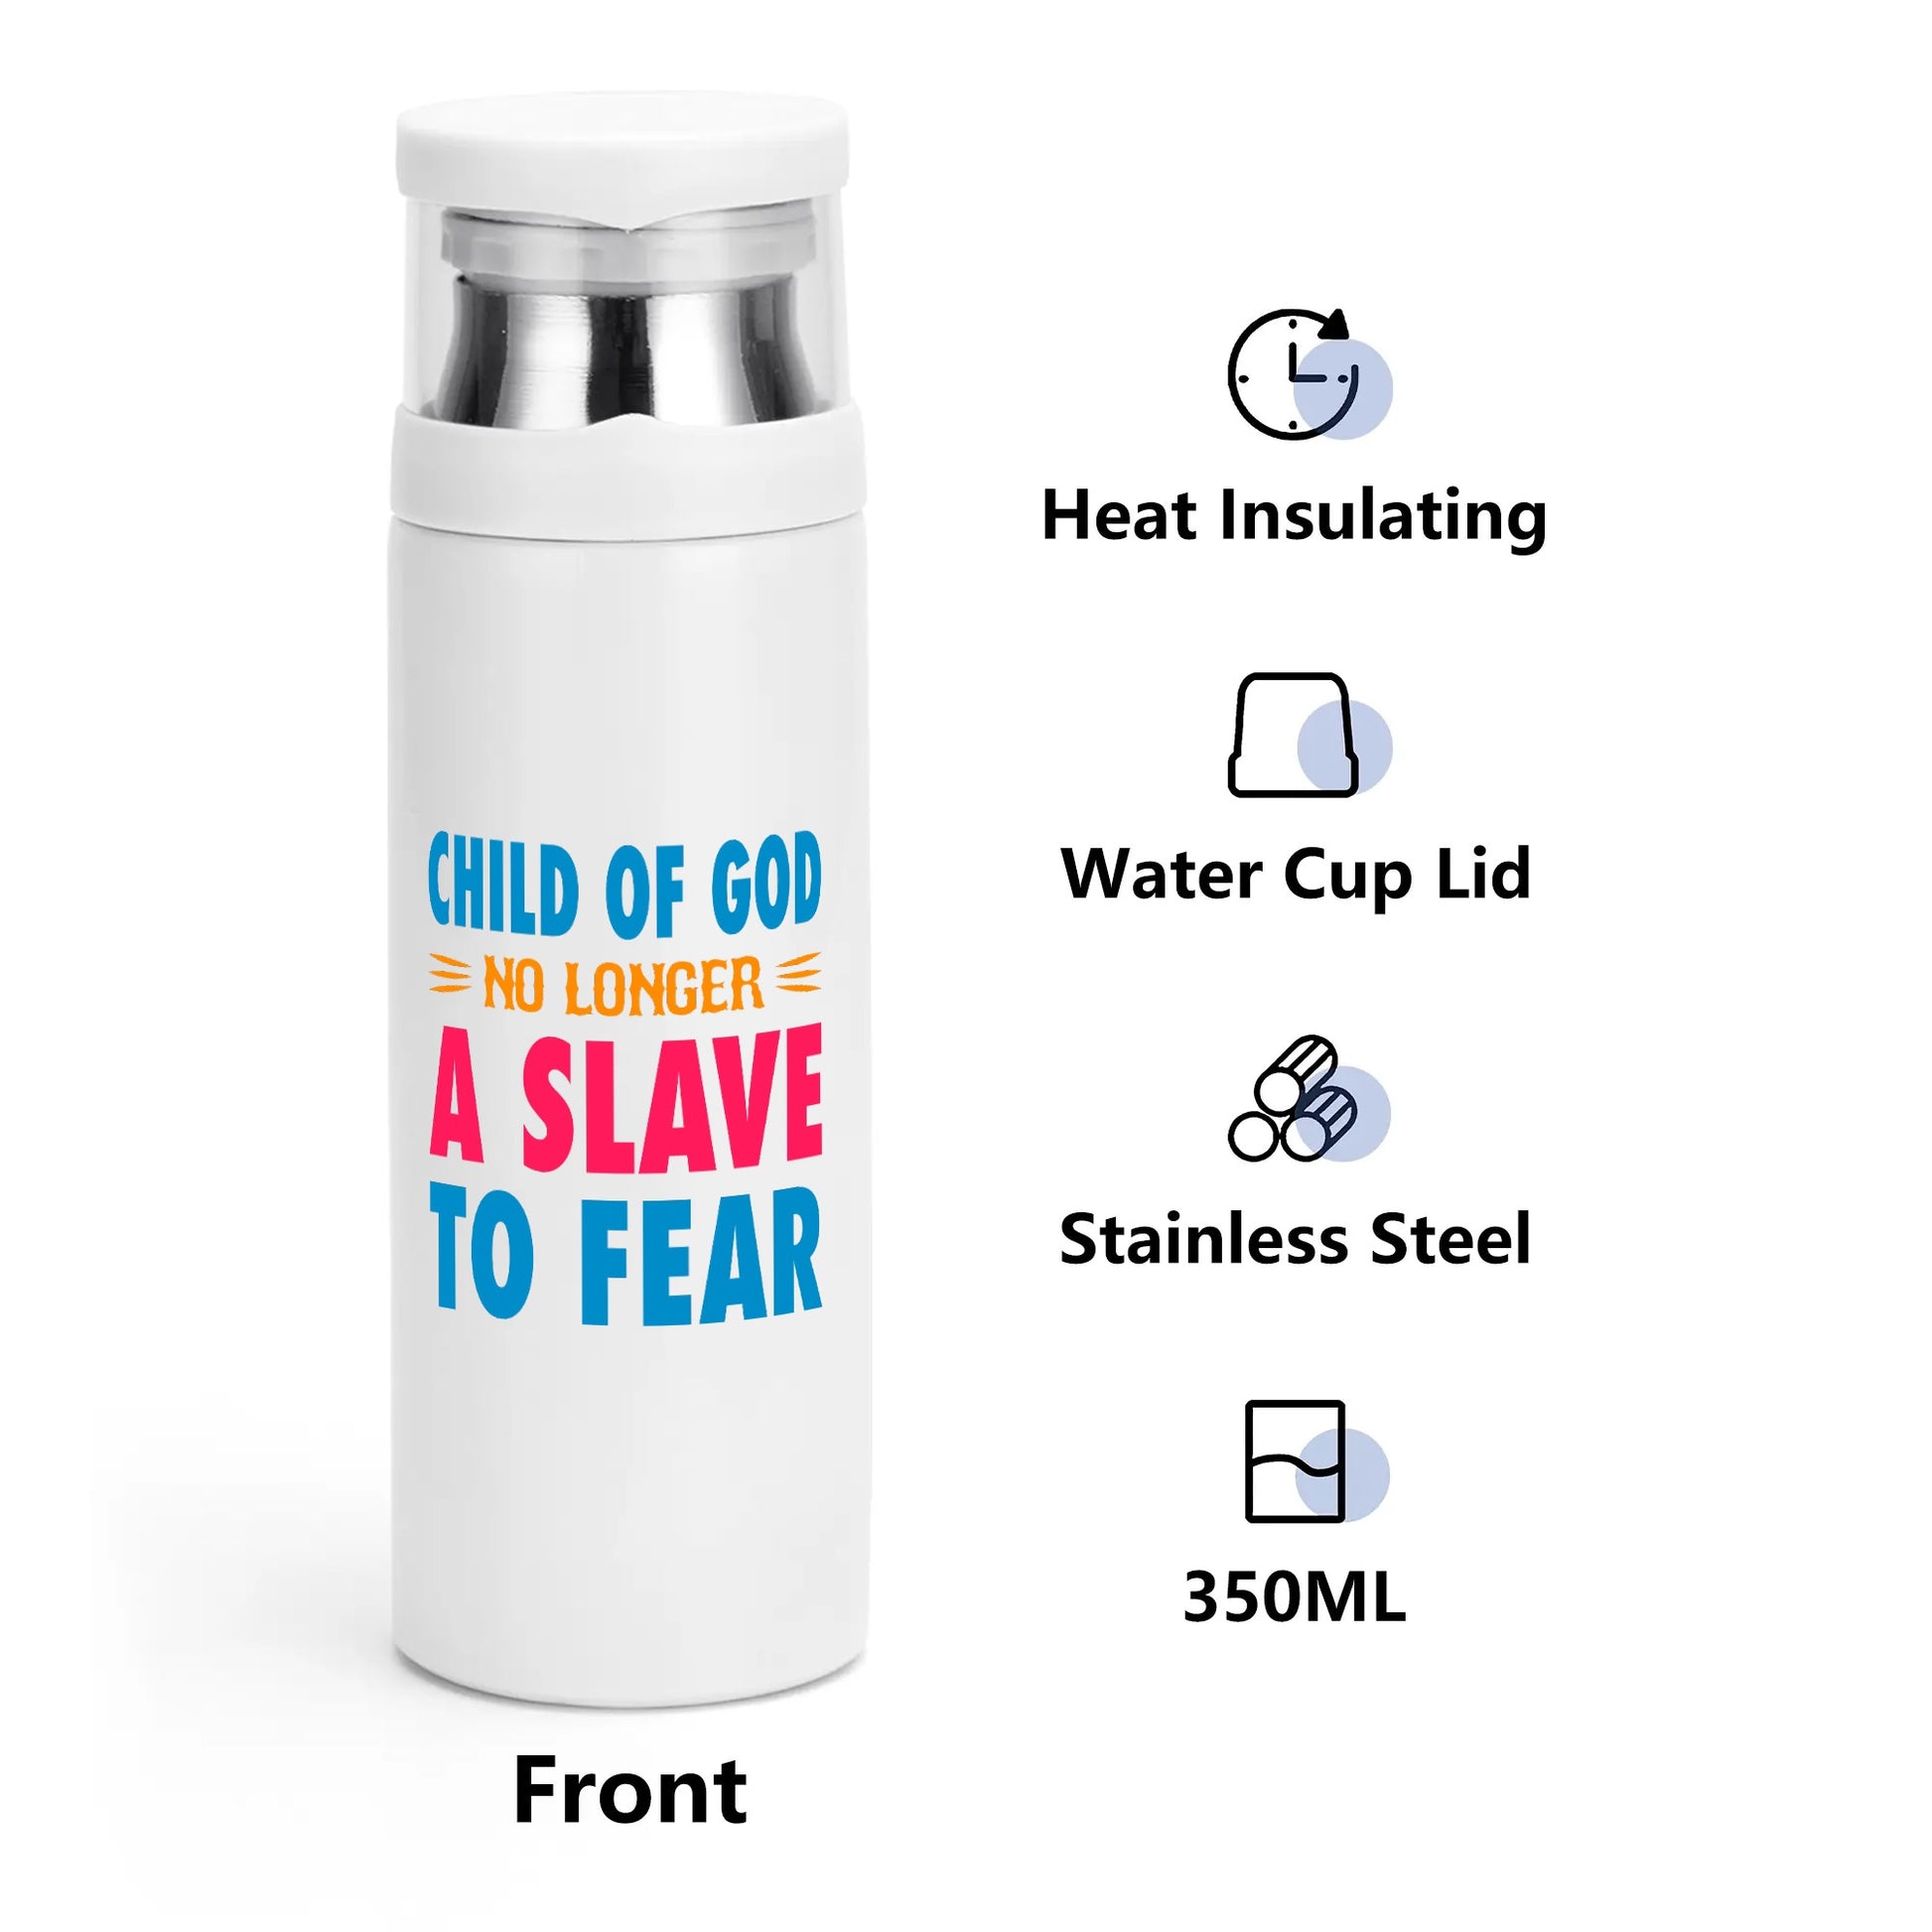 Child Of God No Longer A Slave To Fear Vacuum Bottle with Cup popcustoms